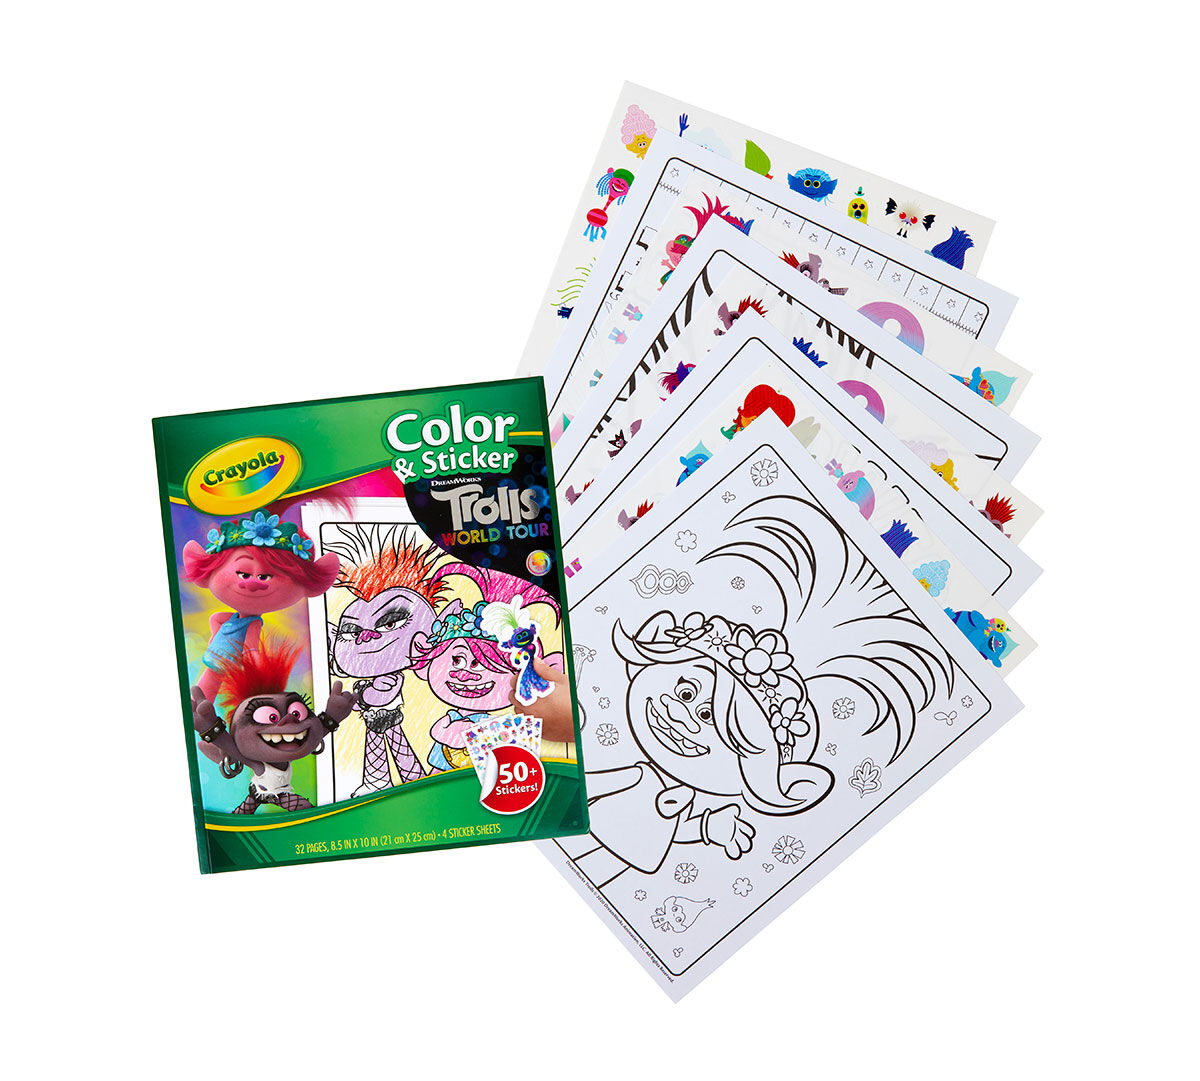 Trolls World Tour Colouring Acivity Set Childrens Stickers Pencils Party Gift 